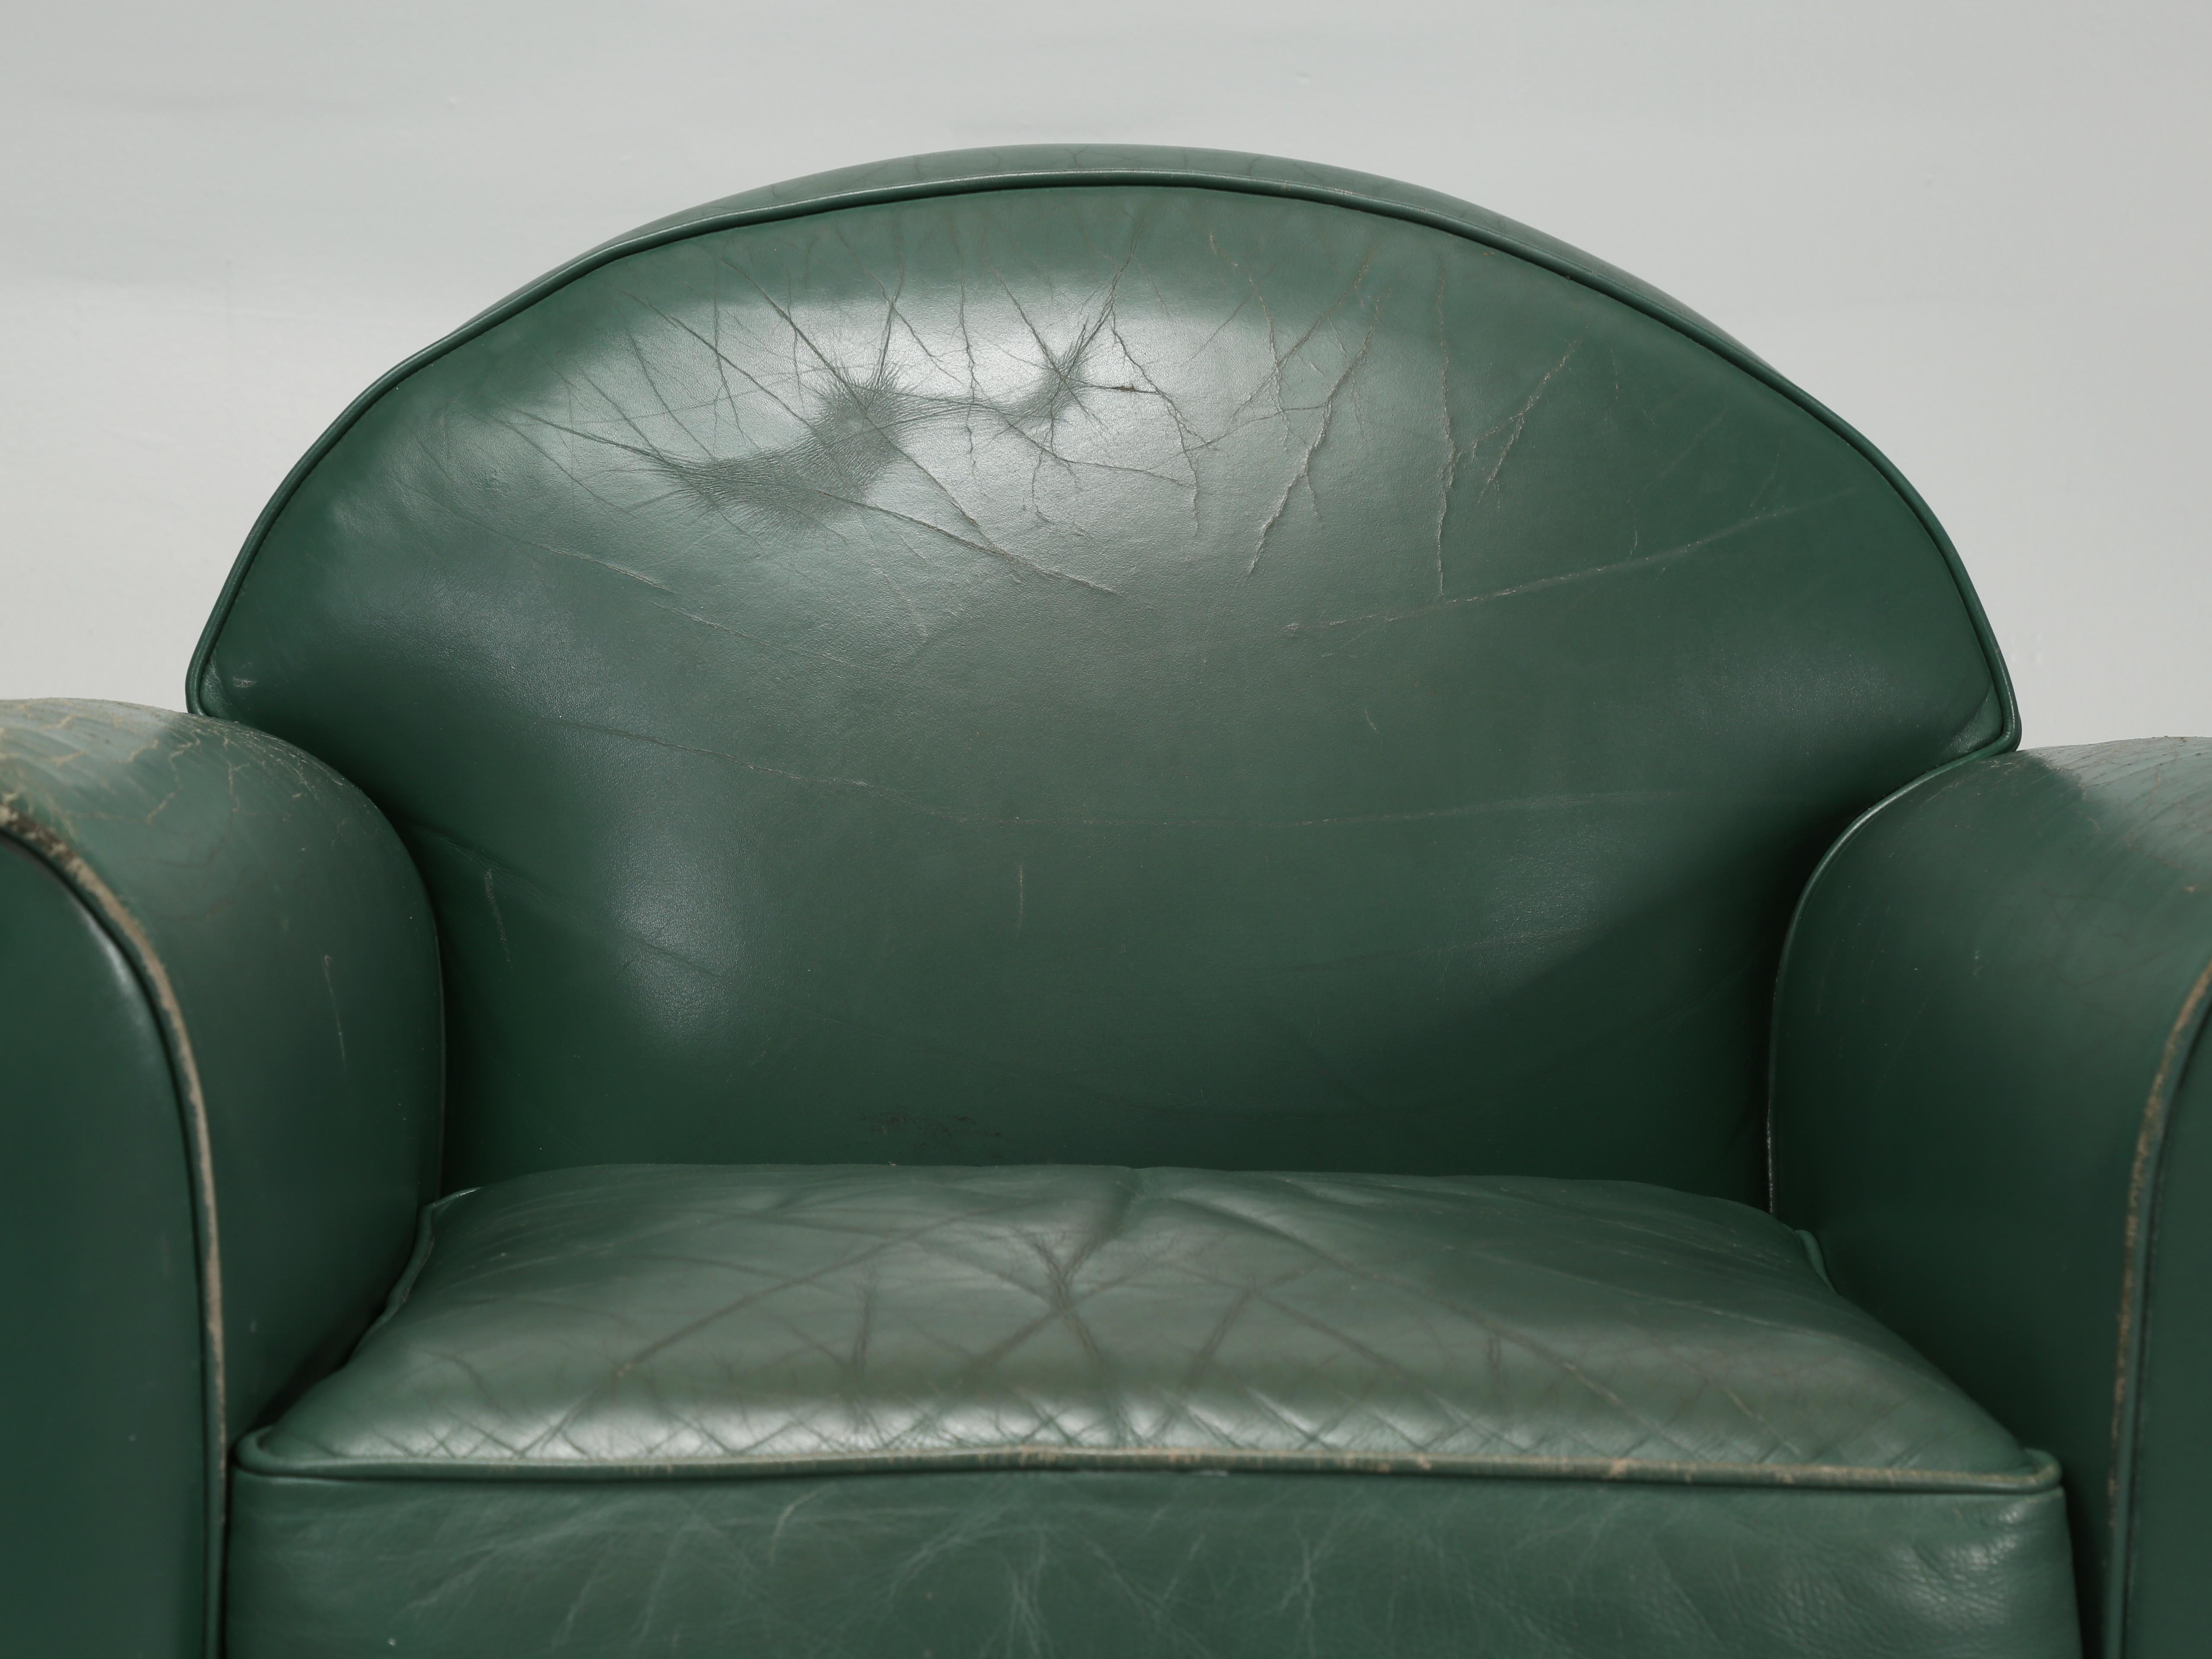 Vintage French leather club chairs, produced by the French firm of HUGUES CHEVALIER of Paris, who also made the furniture for Cartier’s Head Office in Paris. Mr. Hugues Chevalier designs were inspired from the Art Deco period and this particular